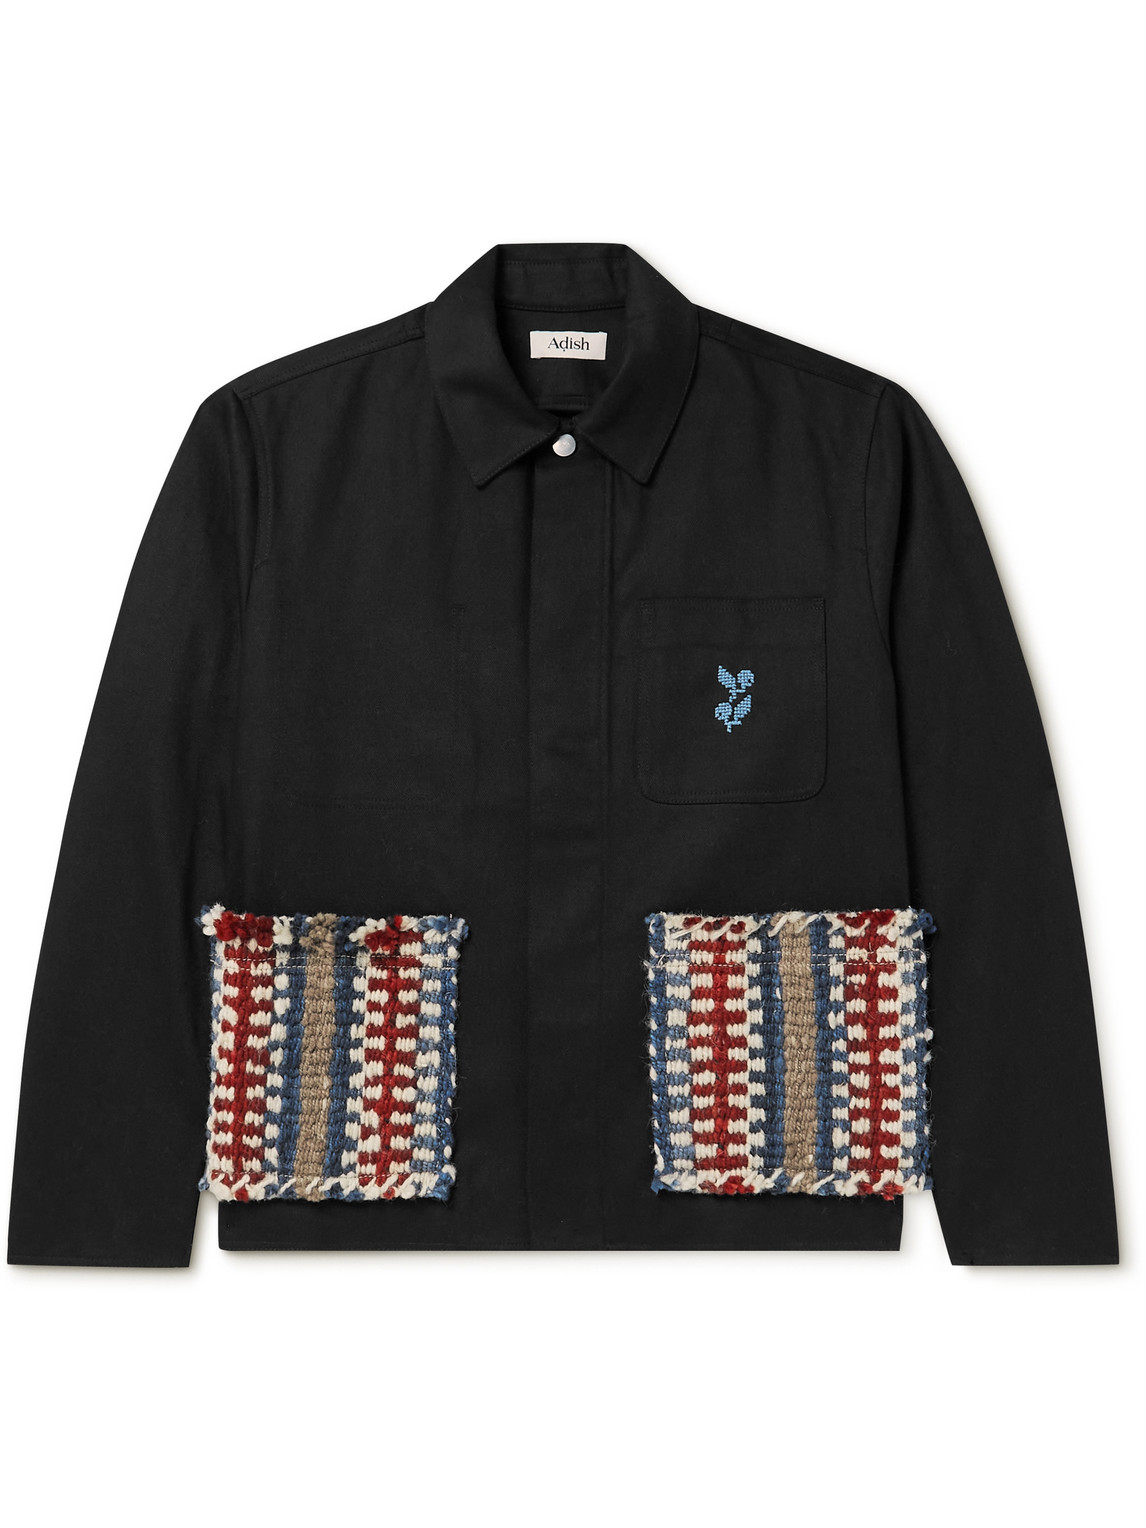 Adish Logo-embroidered Wool-trimmed Cotton Chore Jacket In Black